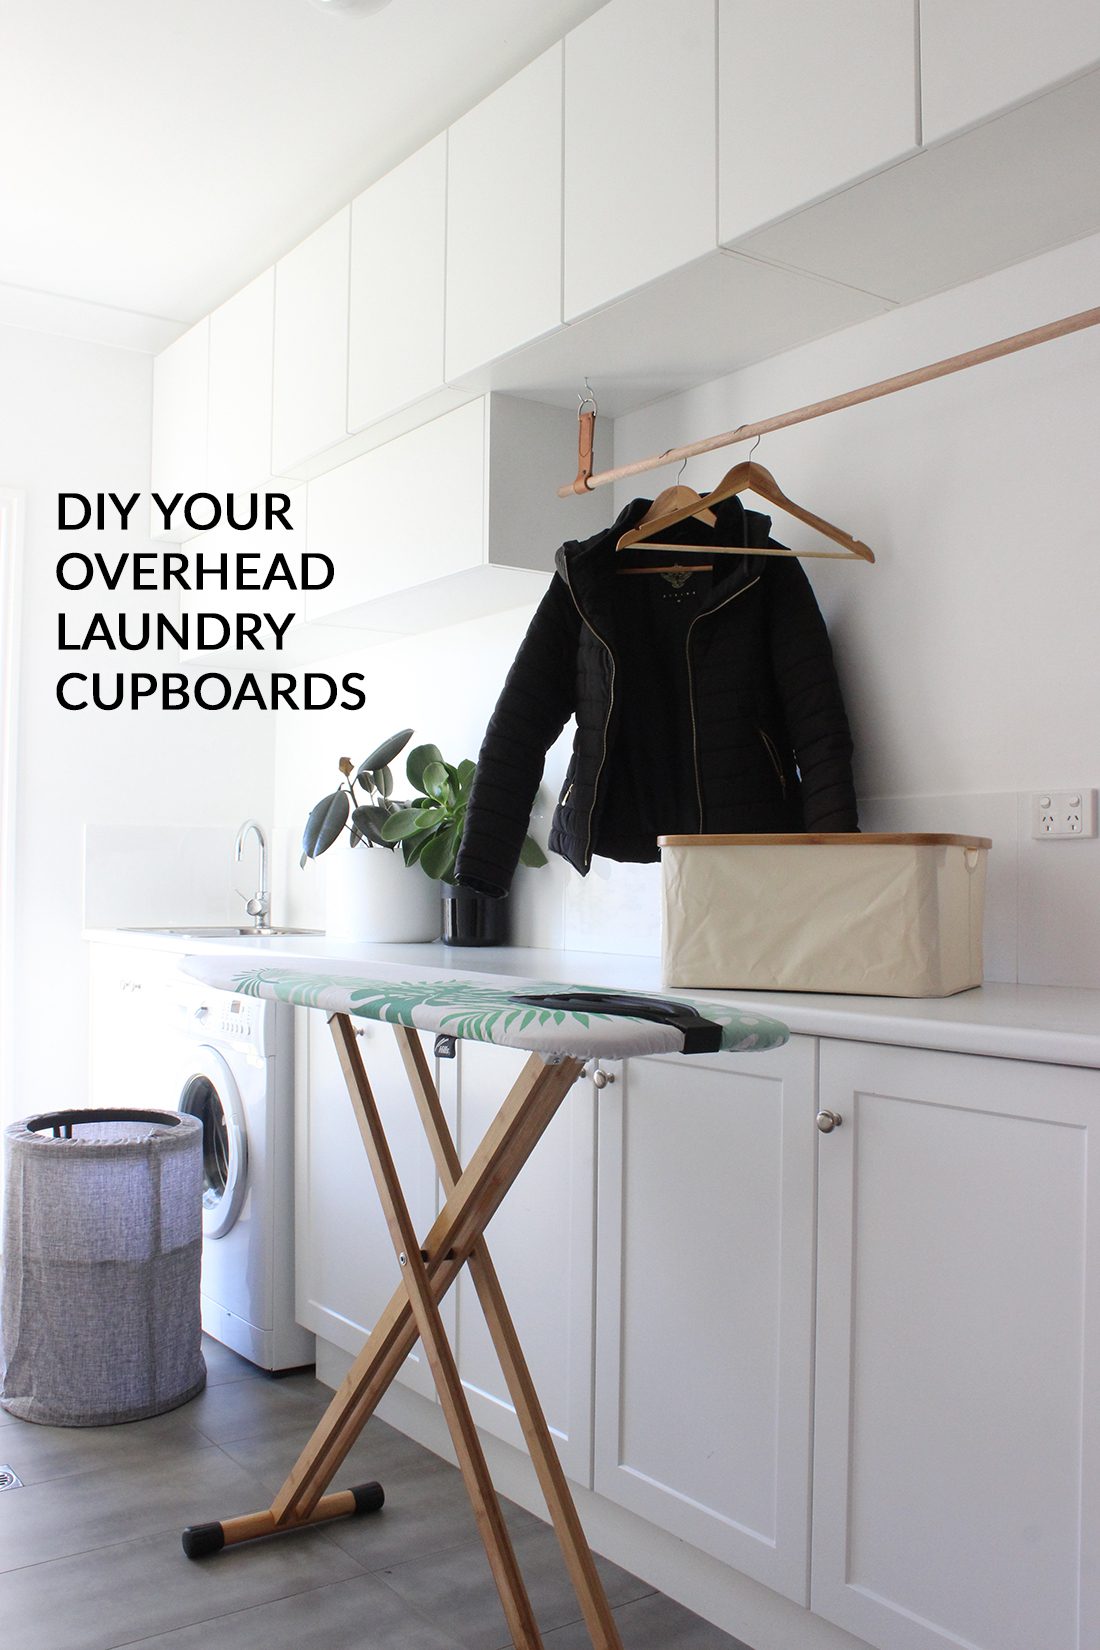 Diy Your Overhead Laundry Cupboards